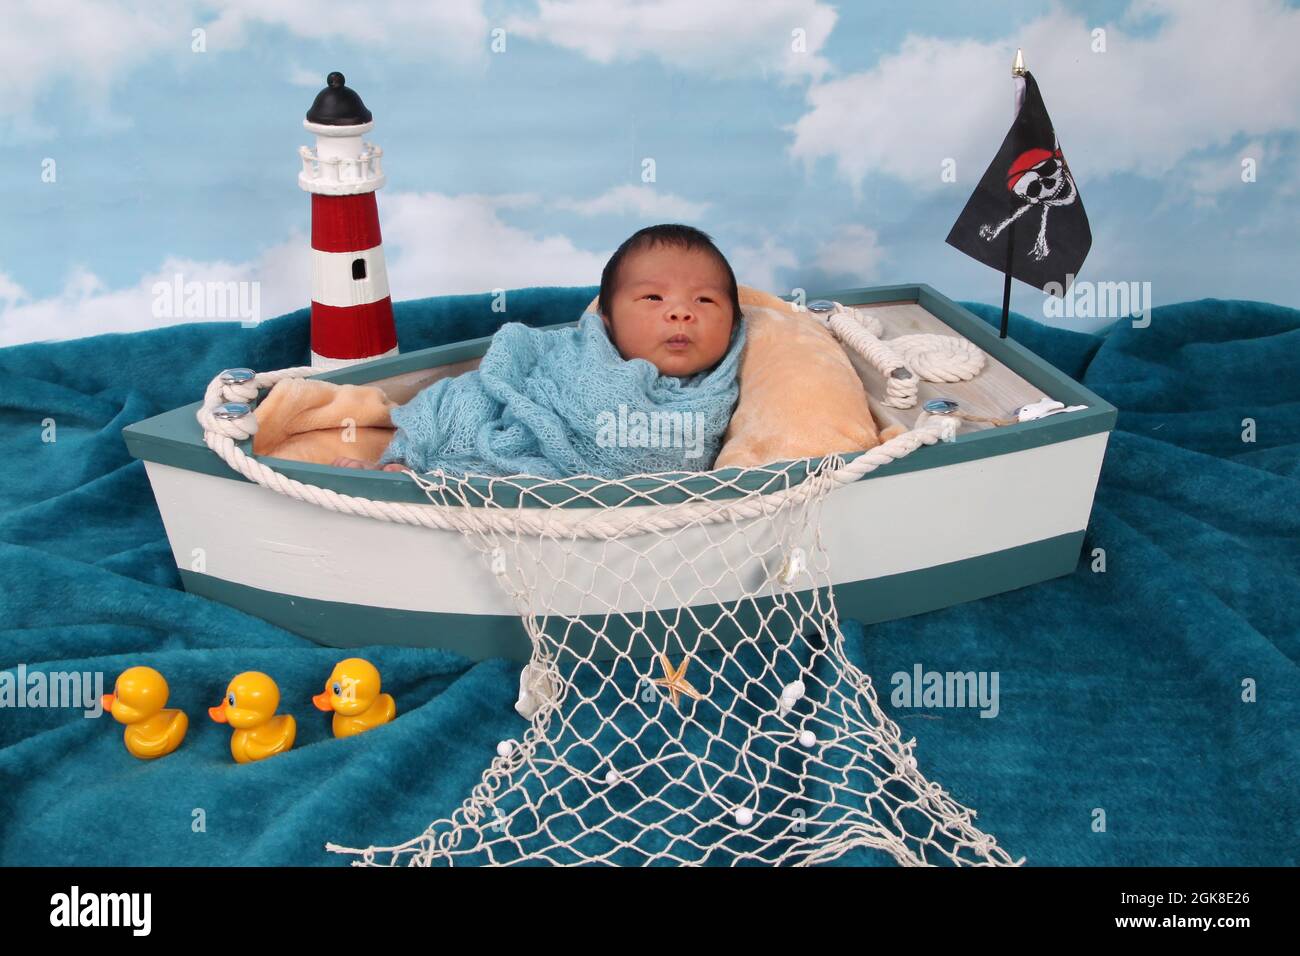 new born baby boy, Philippines ethnicity child in a boat relaxing Stock Photo